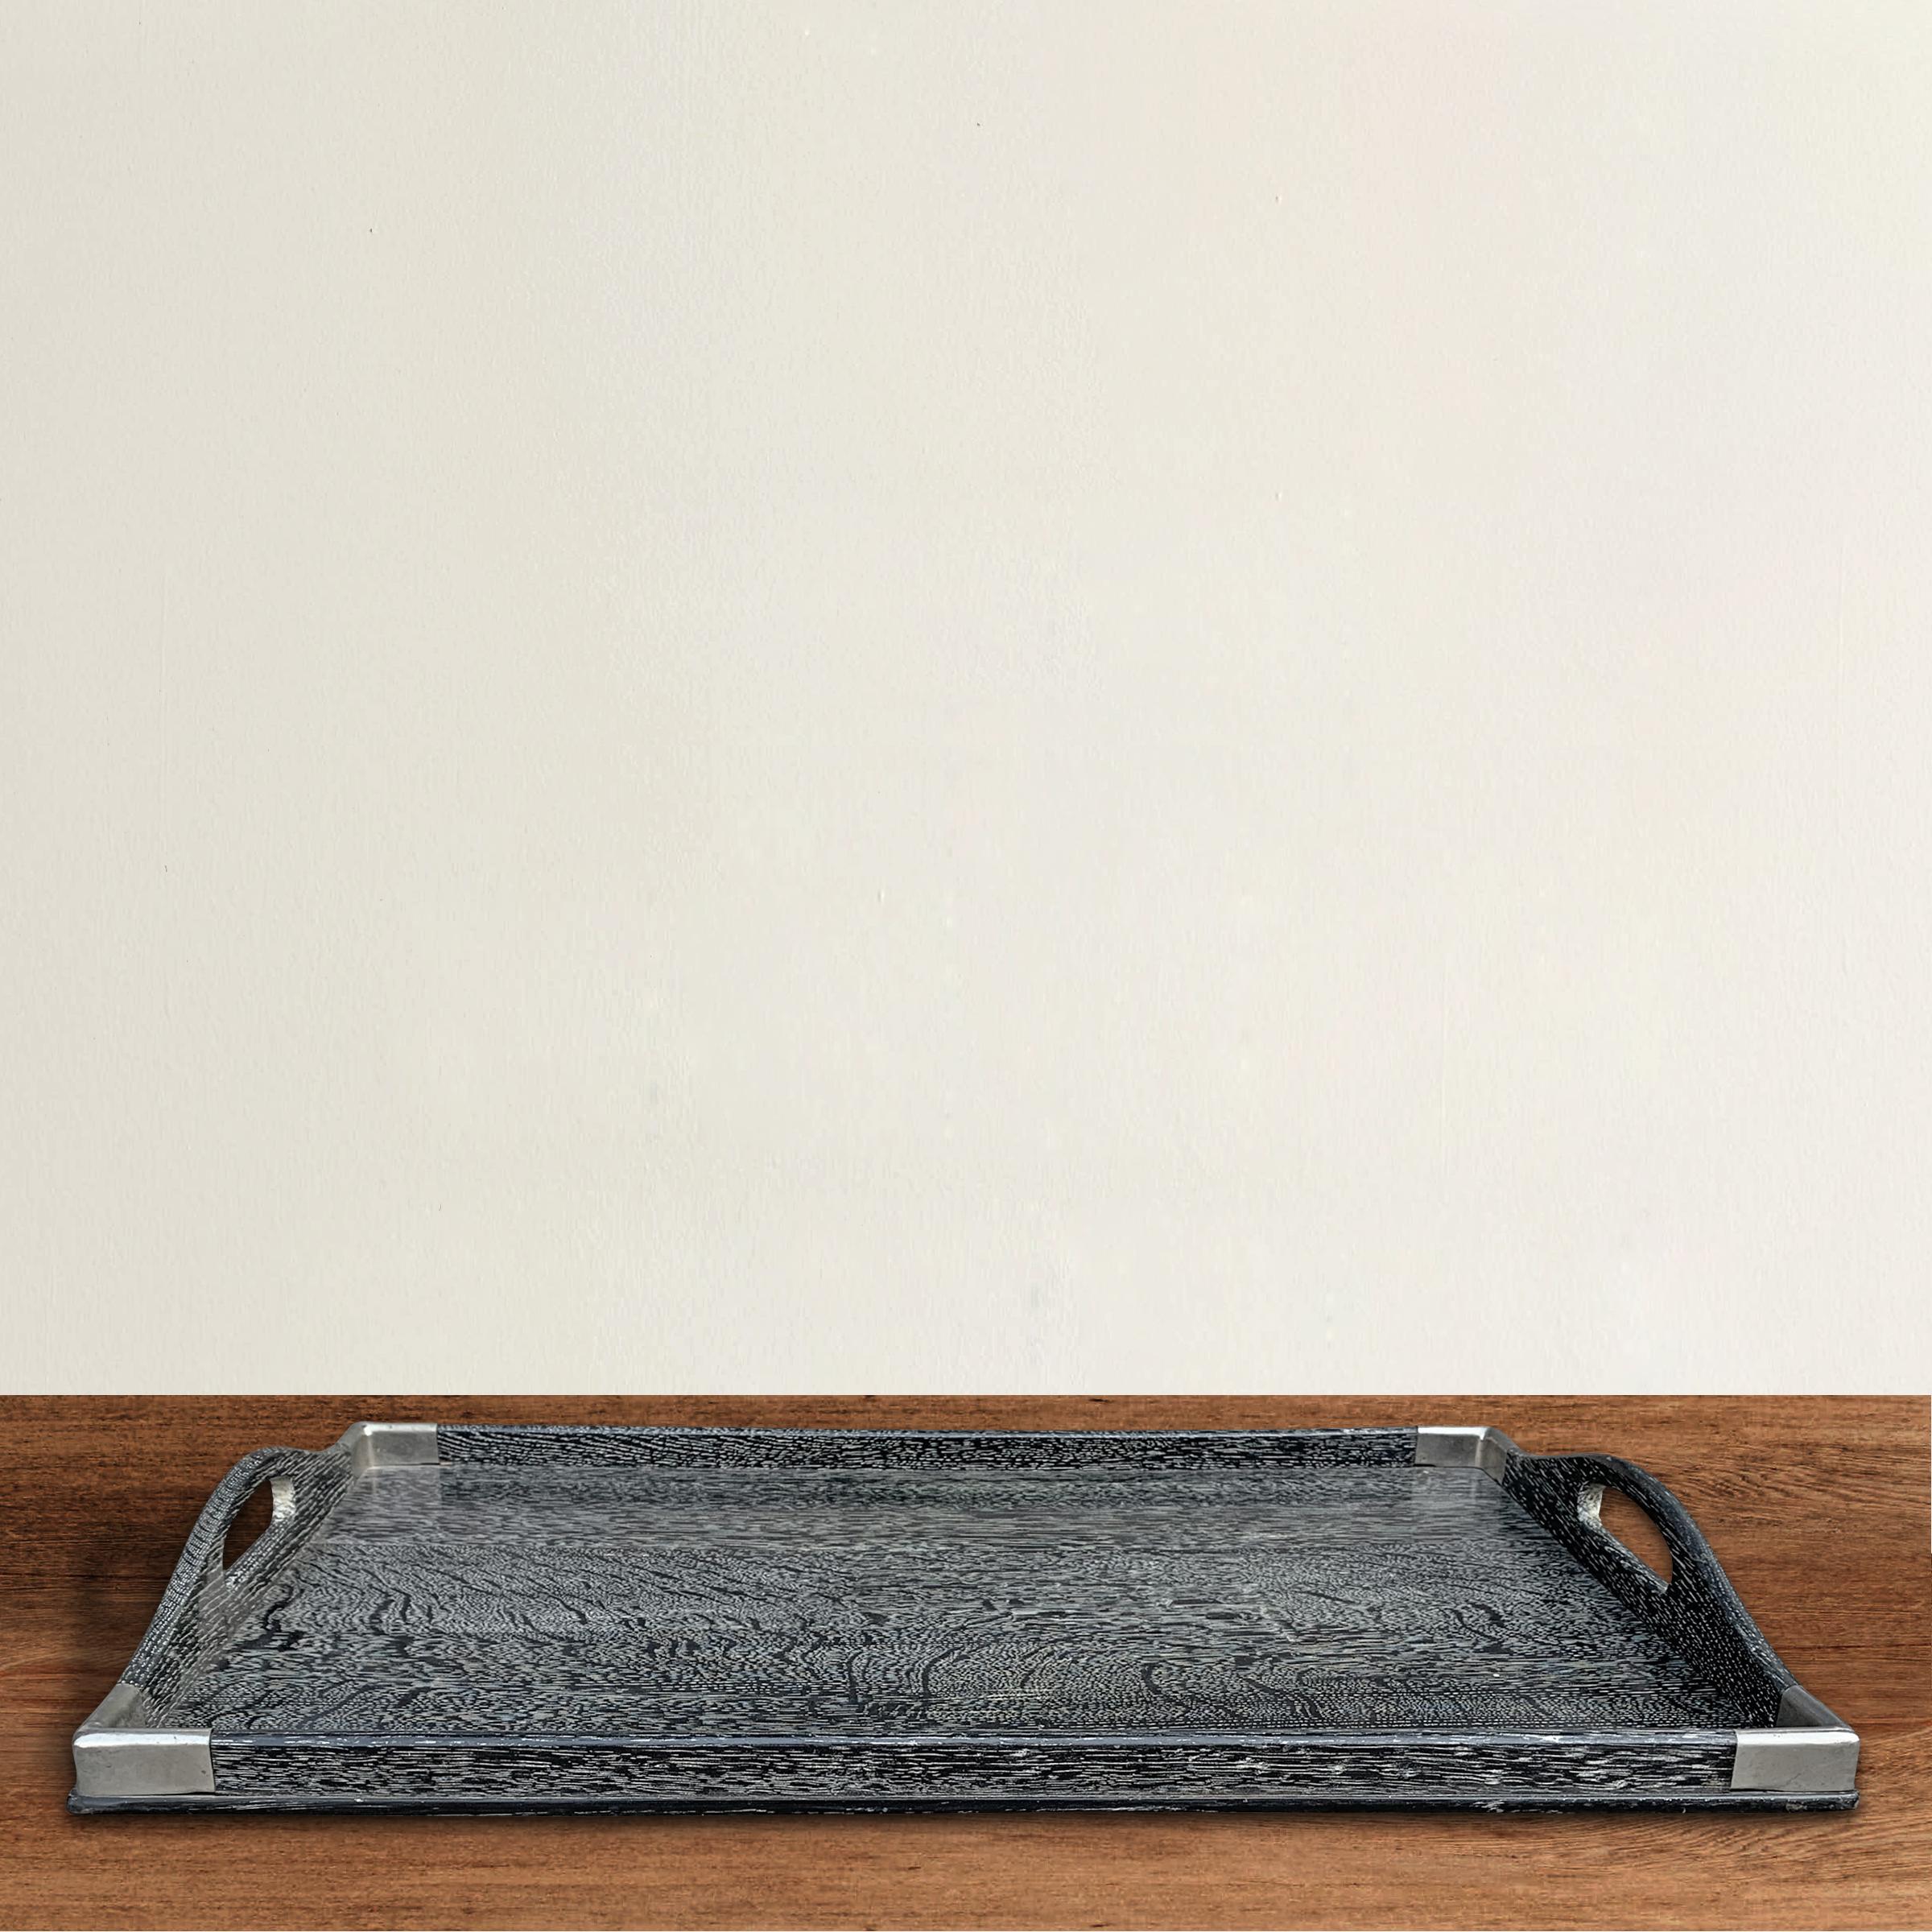 A fantastic mid-20th century black stained and Cerused rift oak tray with silver plated corner mounts. Perfect for a coffee table, breakfast in bed, or in your bathroom to hold myriad things.